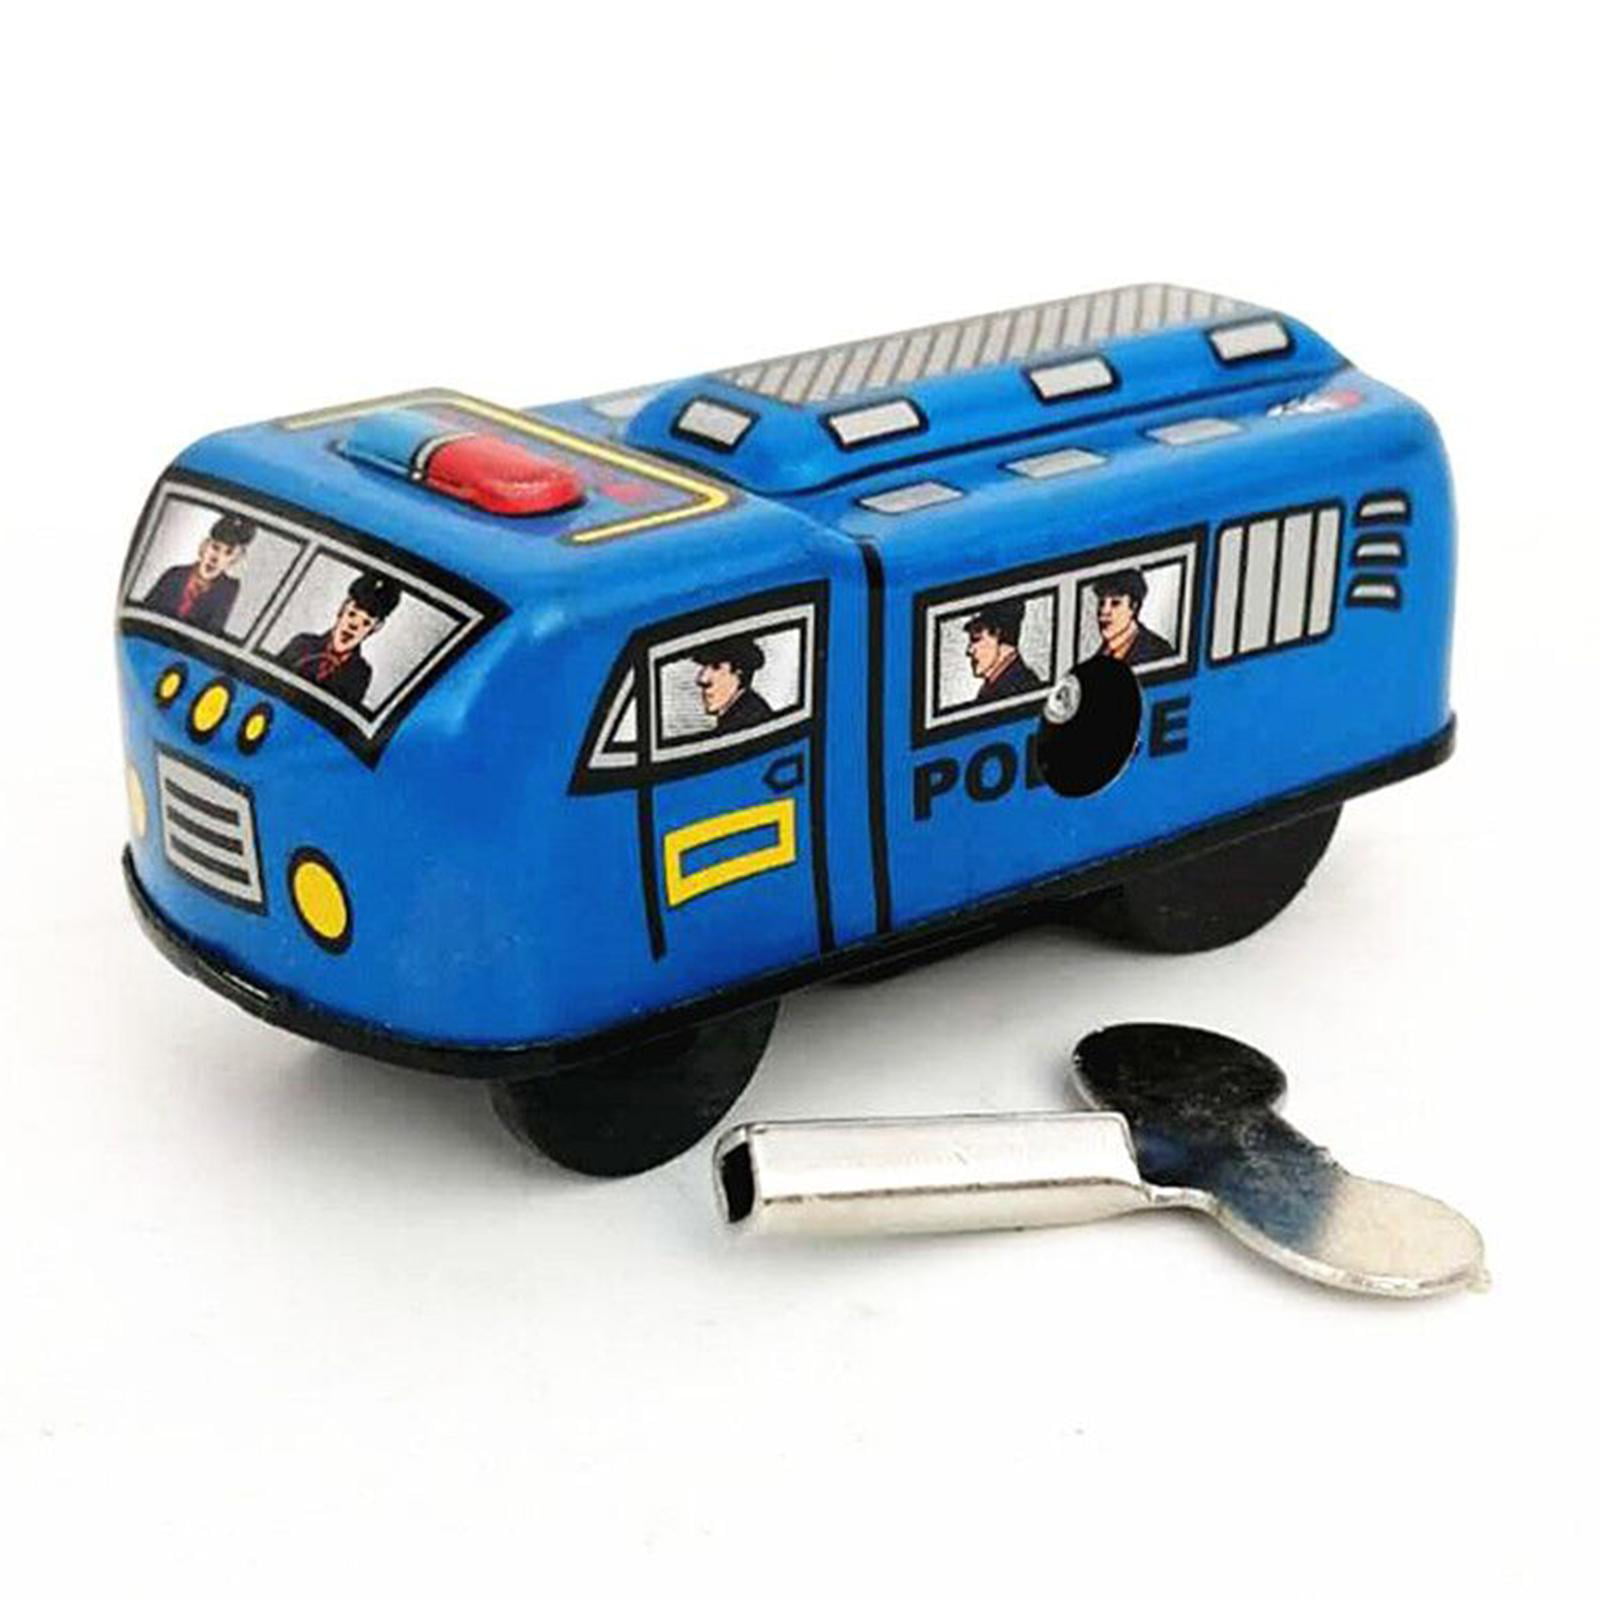 Mechanical Windup Toys Details about   Classic Tin Toy Wind Up Car Taxi with Removable Key 